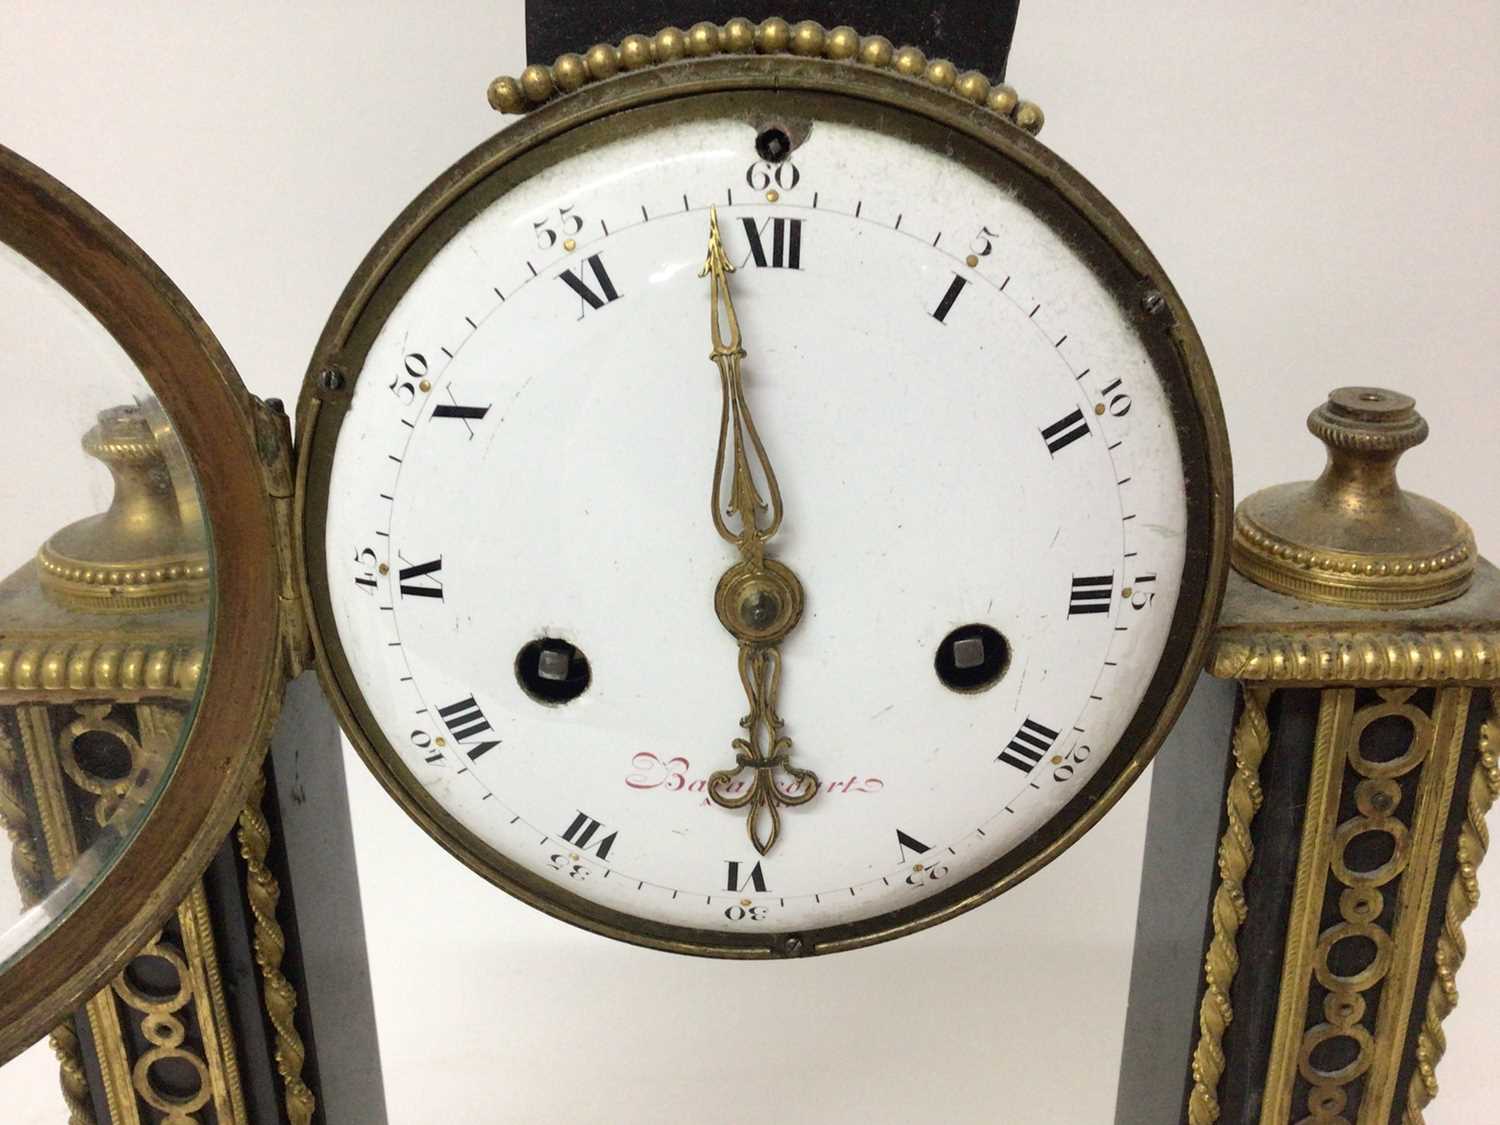 Early 19th century French Louis XVI-style marble and ormolu mantel clock - Image 2 of 8